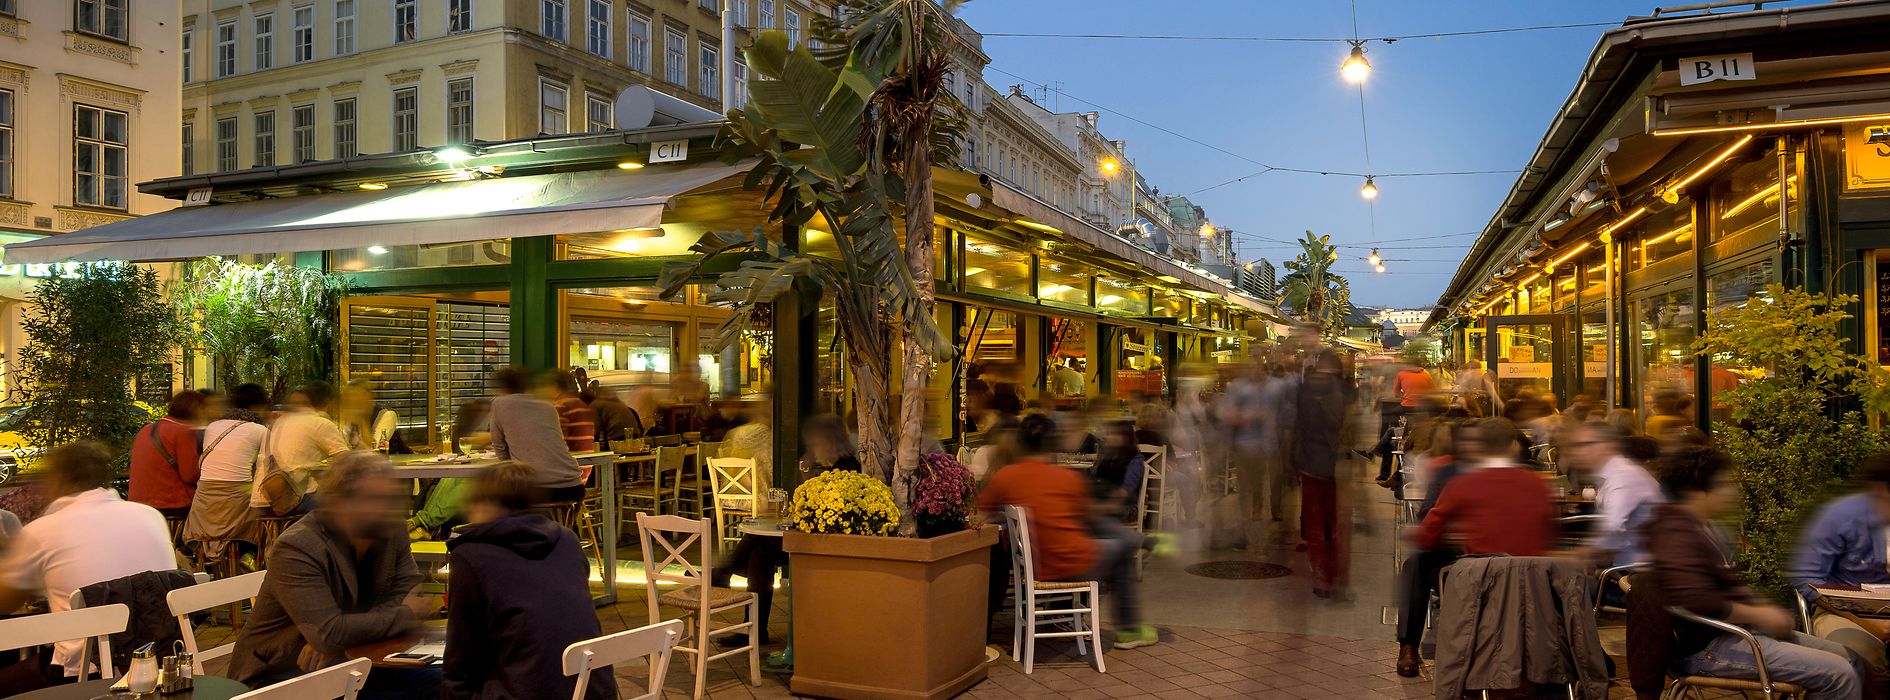 Bustling scene in the pubs and cafes at Naschmarkt, exterior shot with people 